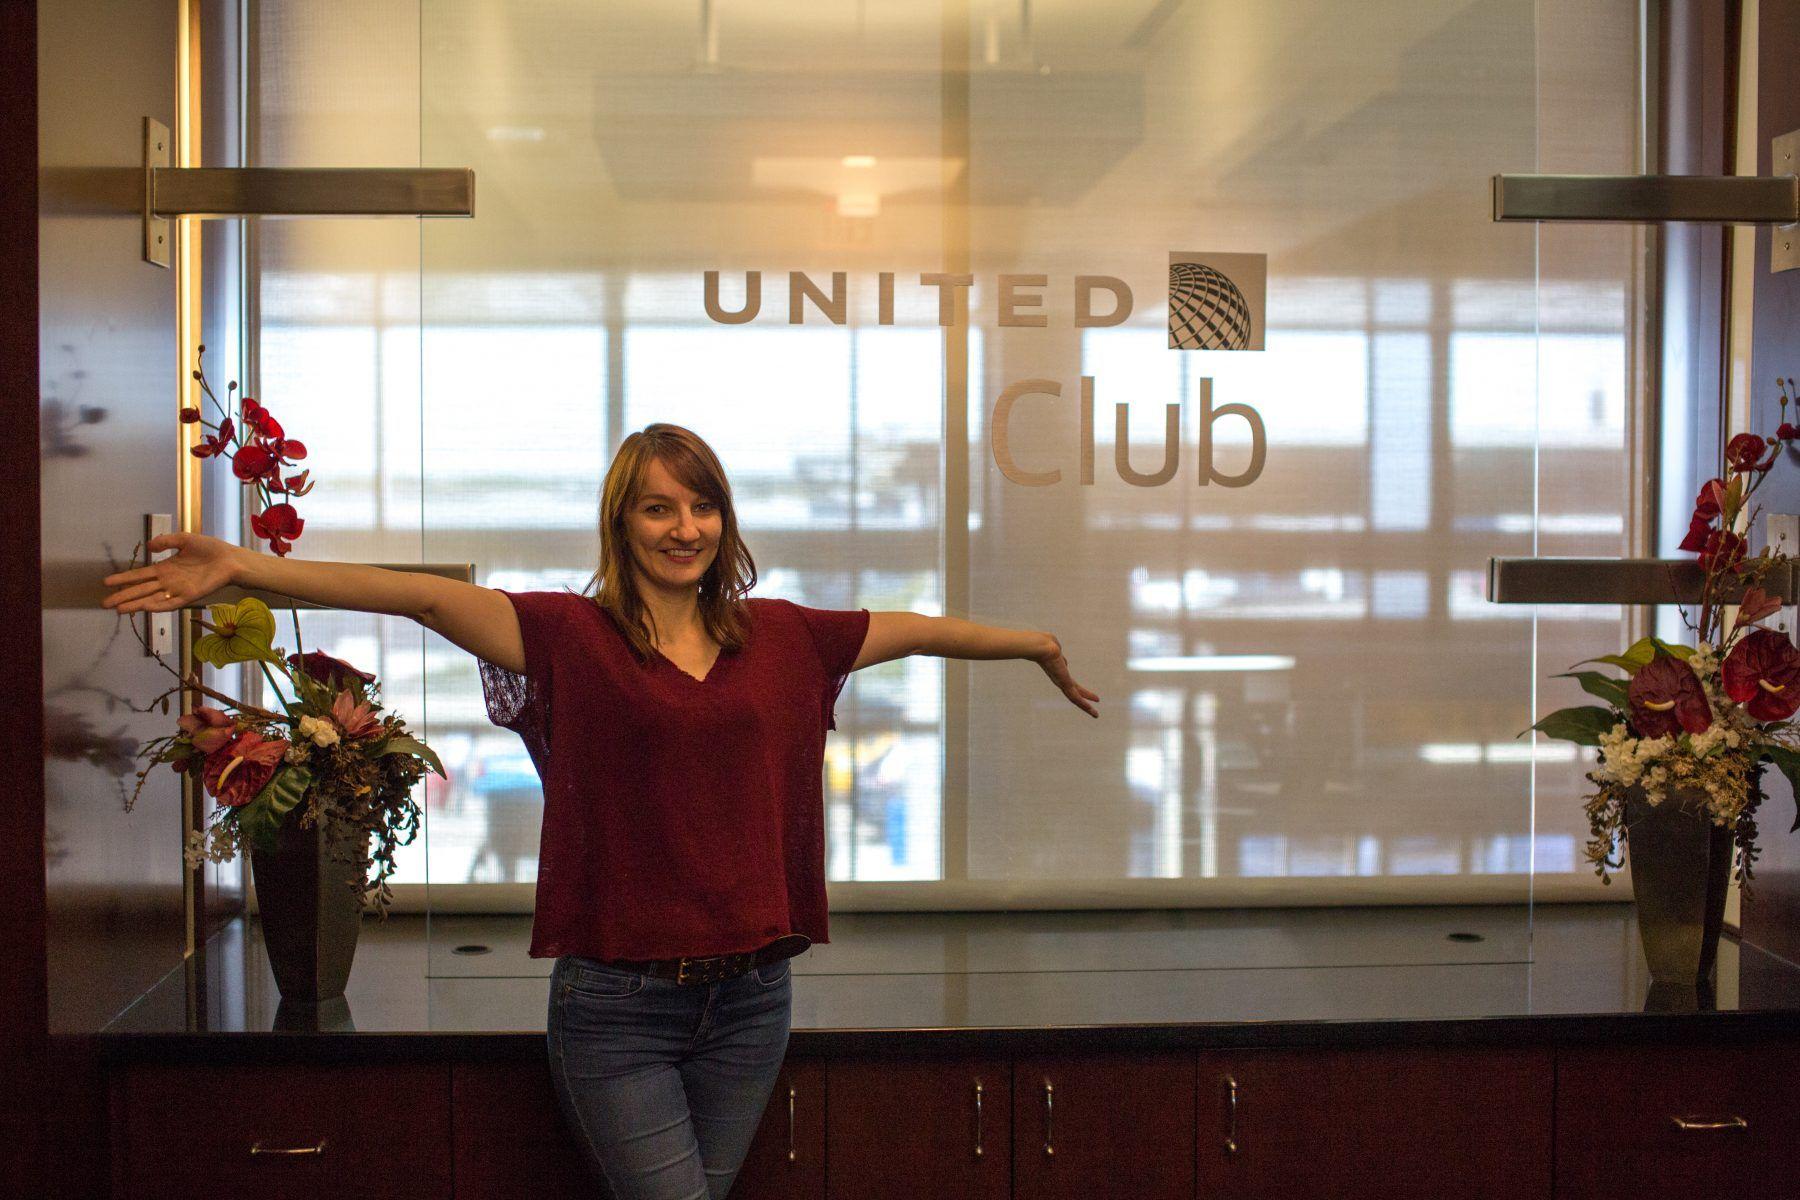 United Airlines Club Logo - United Airlines Lounge Access Restrictions | Million Mile Secrets